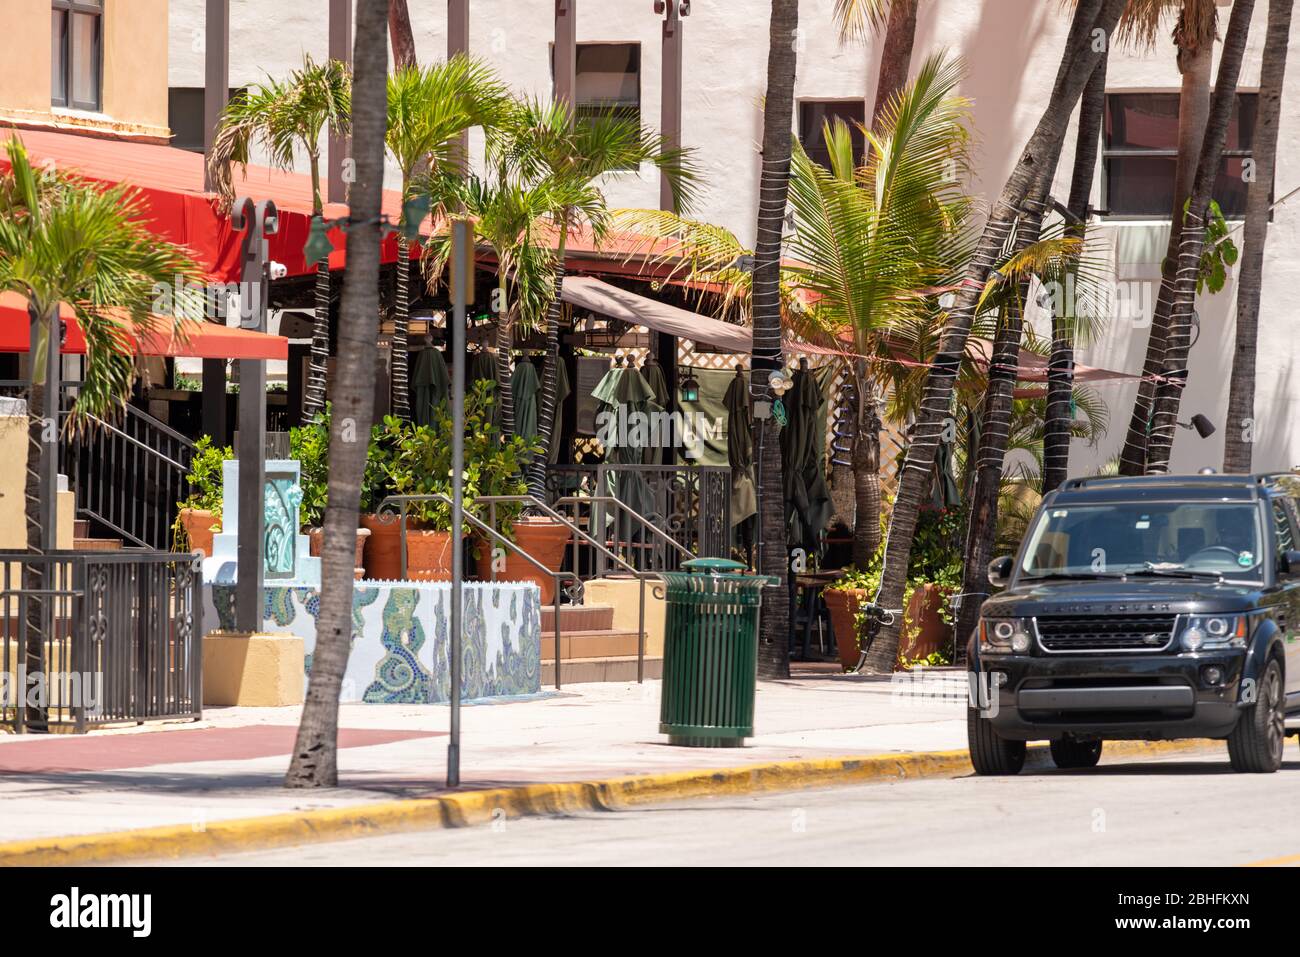 Stay at home order issued for all of Miami Beach hotels closed for business Stock Photo